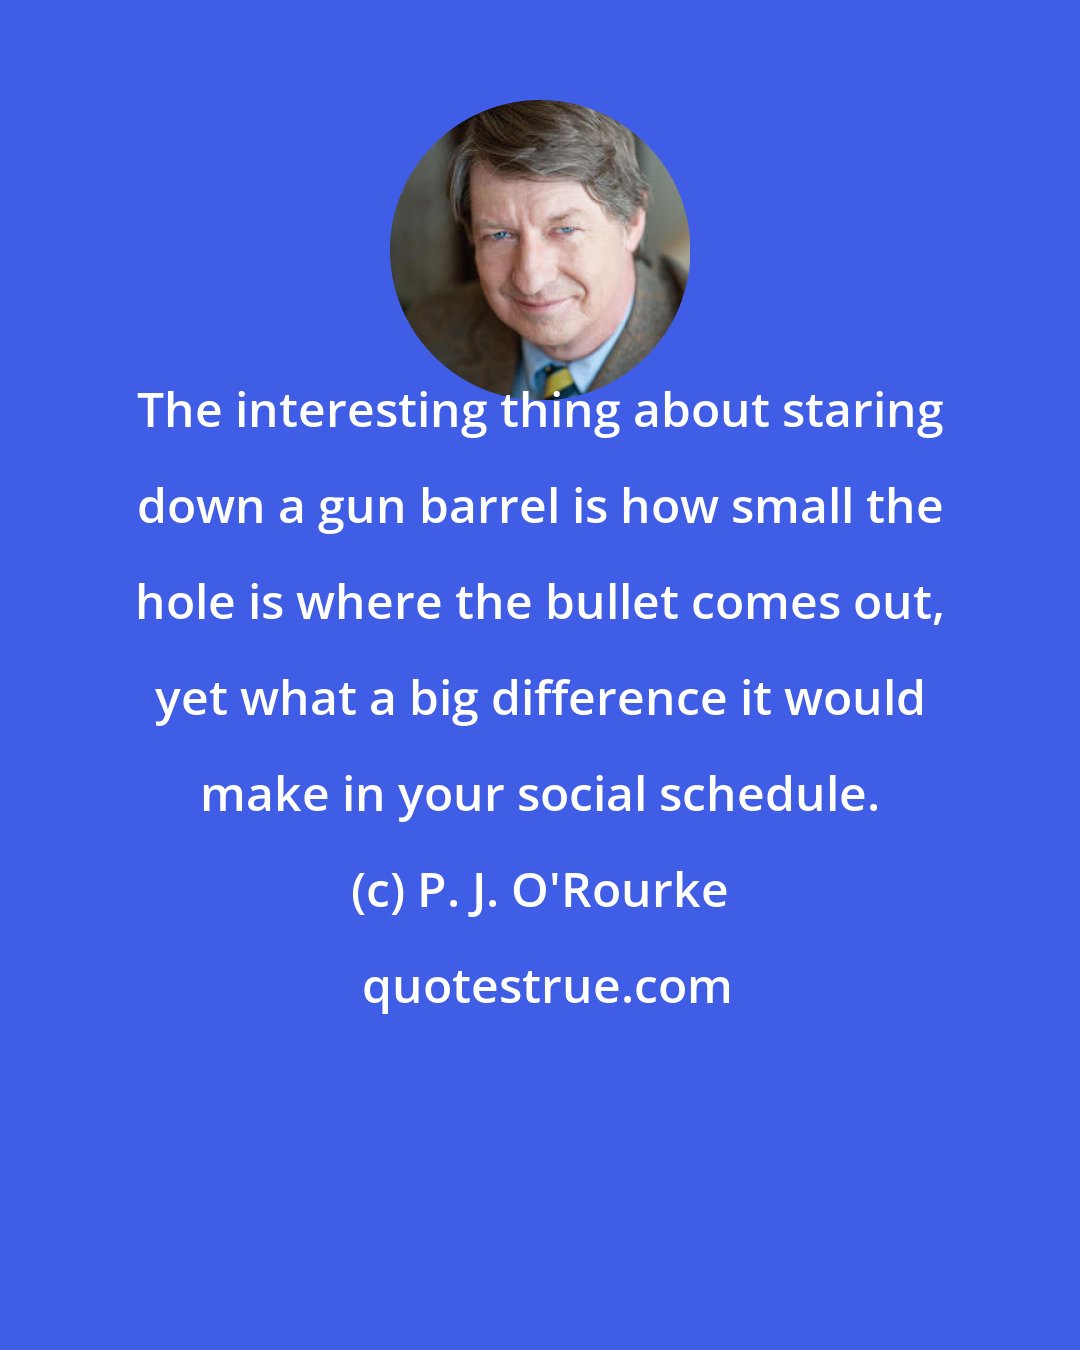 P. J. O'Rourke: The interesting thing about staring down a gun barrel is how small the hole is where the bullet comes out, yet what a big difference it would make in your social schedule.